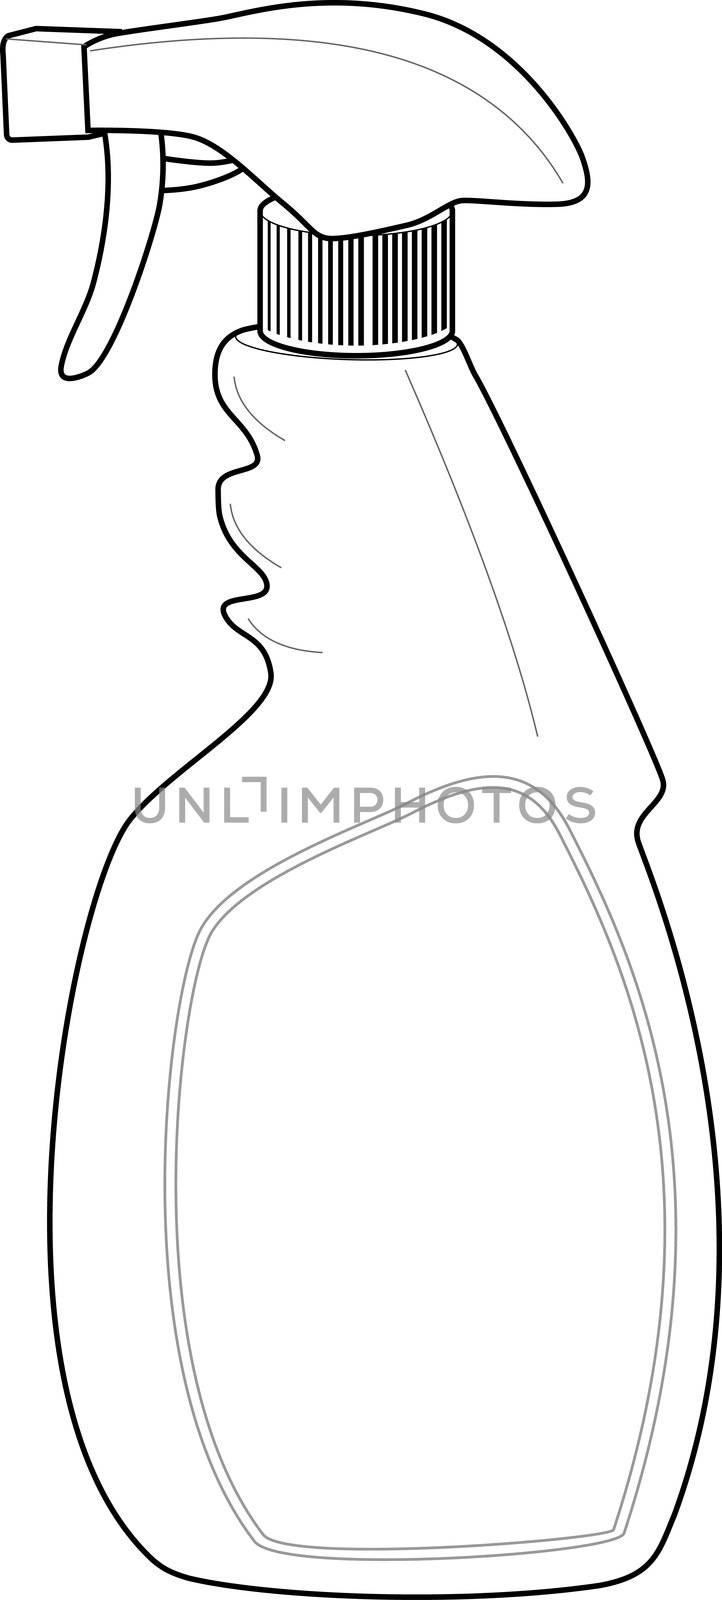 illustration of a line drawing of a Spray bottle cleaner